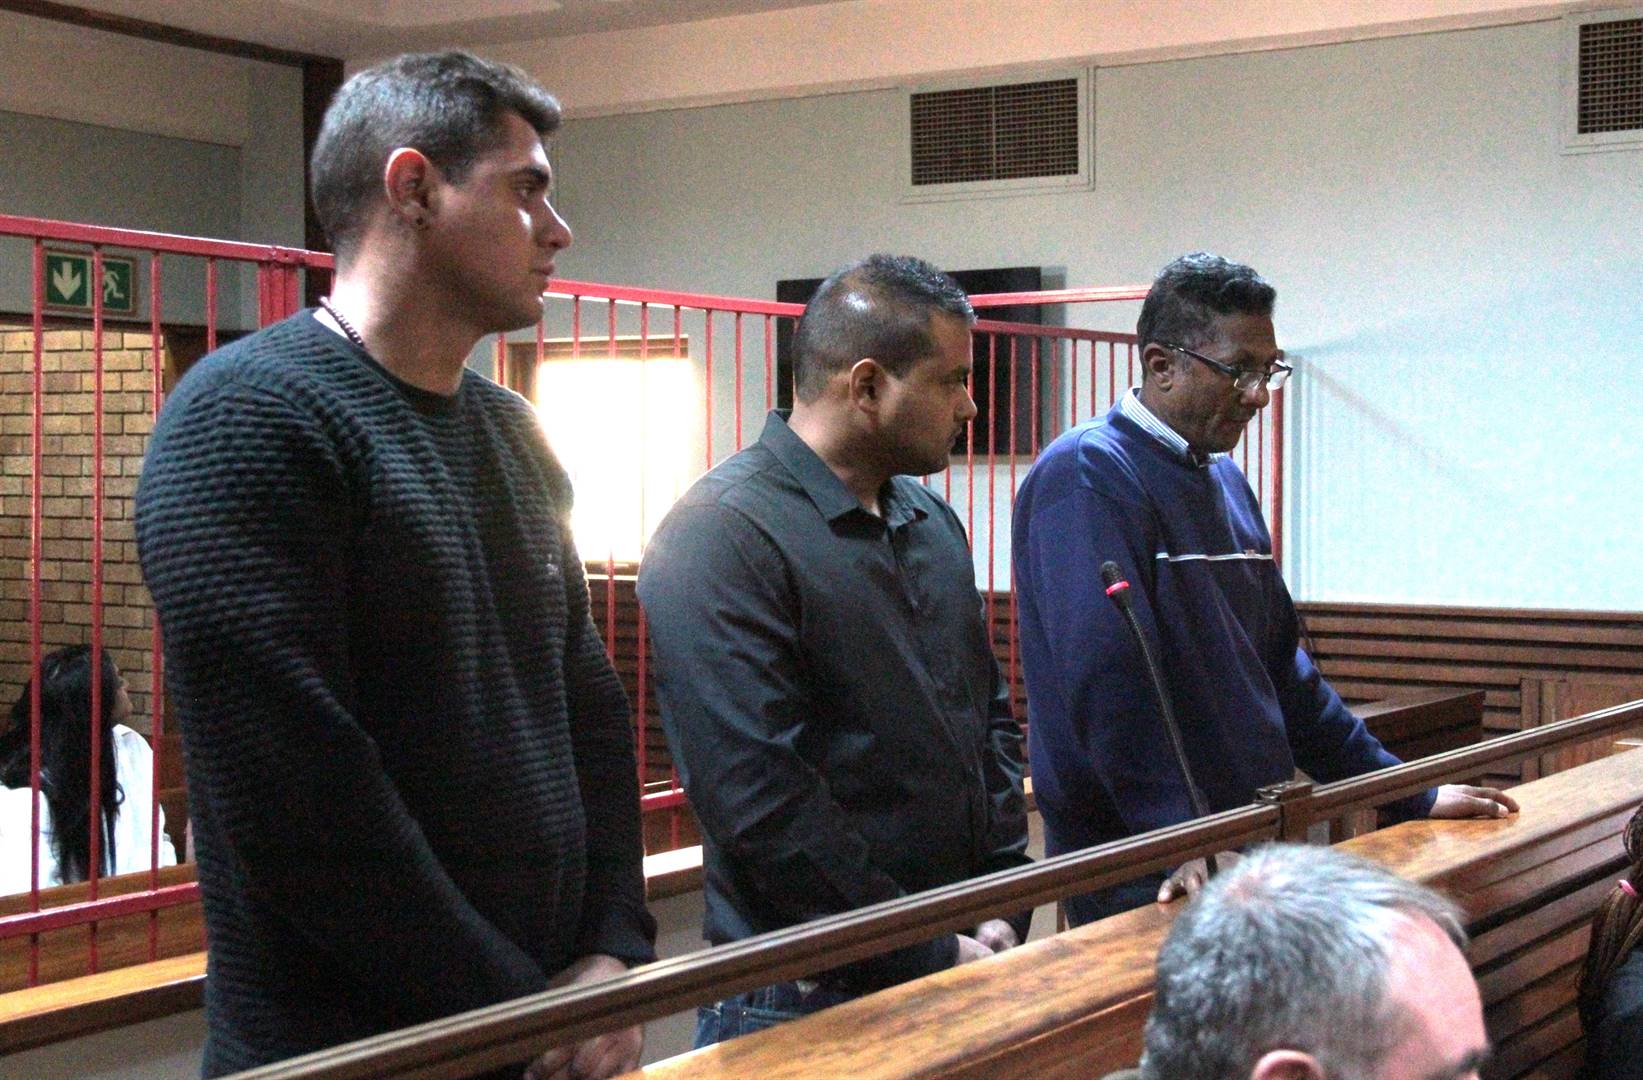 The initial three accused are Rumesh Bavasah, Ukesh Bavasah and Ebel Anwar, but the charges against Ukesh Bavasah were withdrawn whilst Rumesh Bavasah and Anwar entered into a plea agreement.